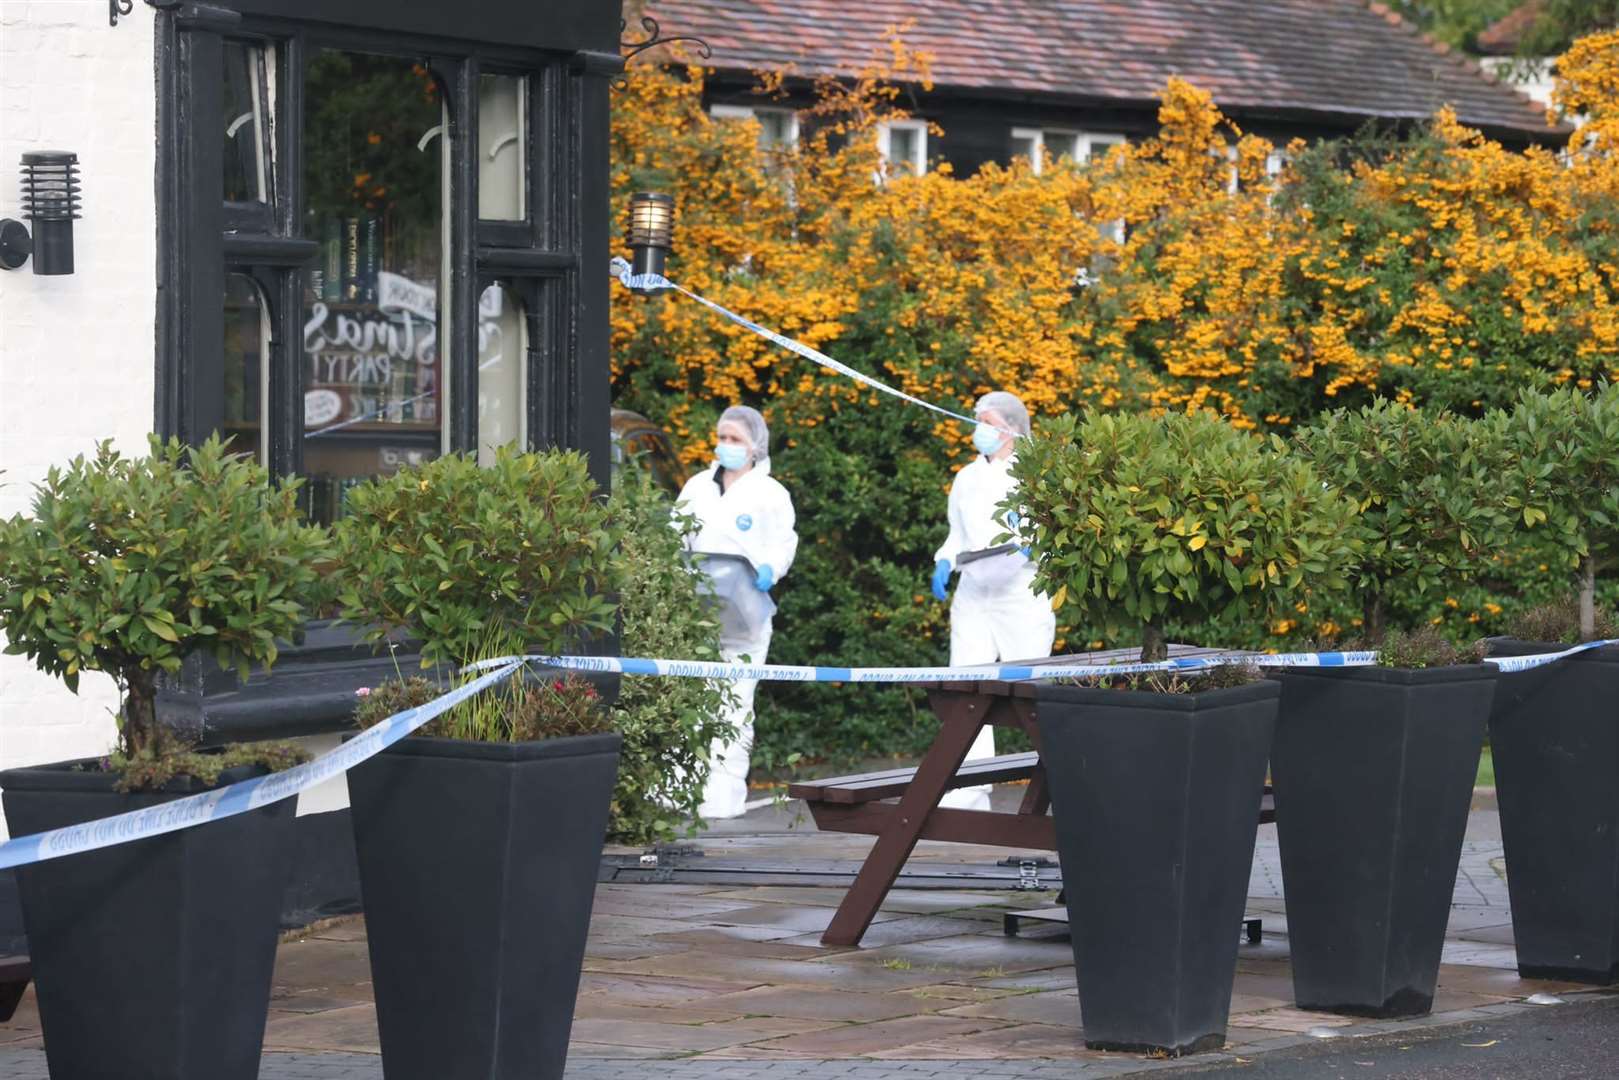 Forensics officers outside the Cricketers pub in Meopham following the fatal stabbing. Pic: UKNIP